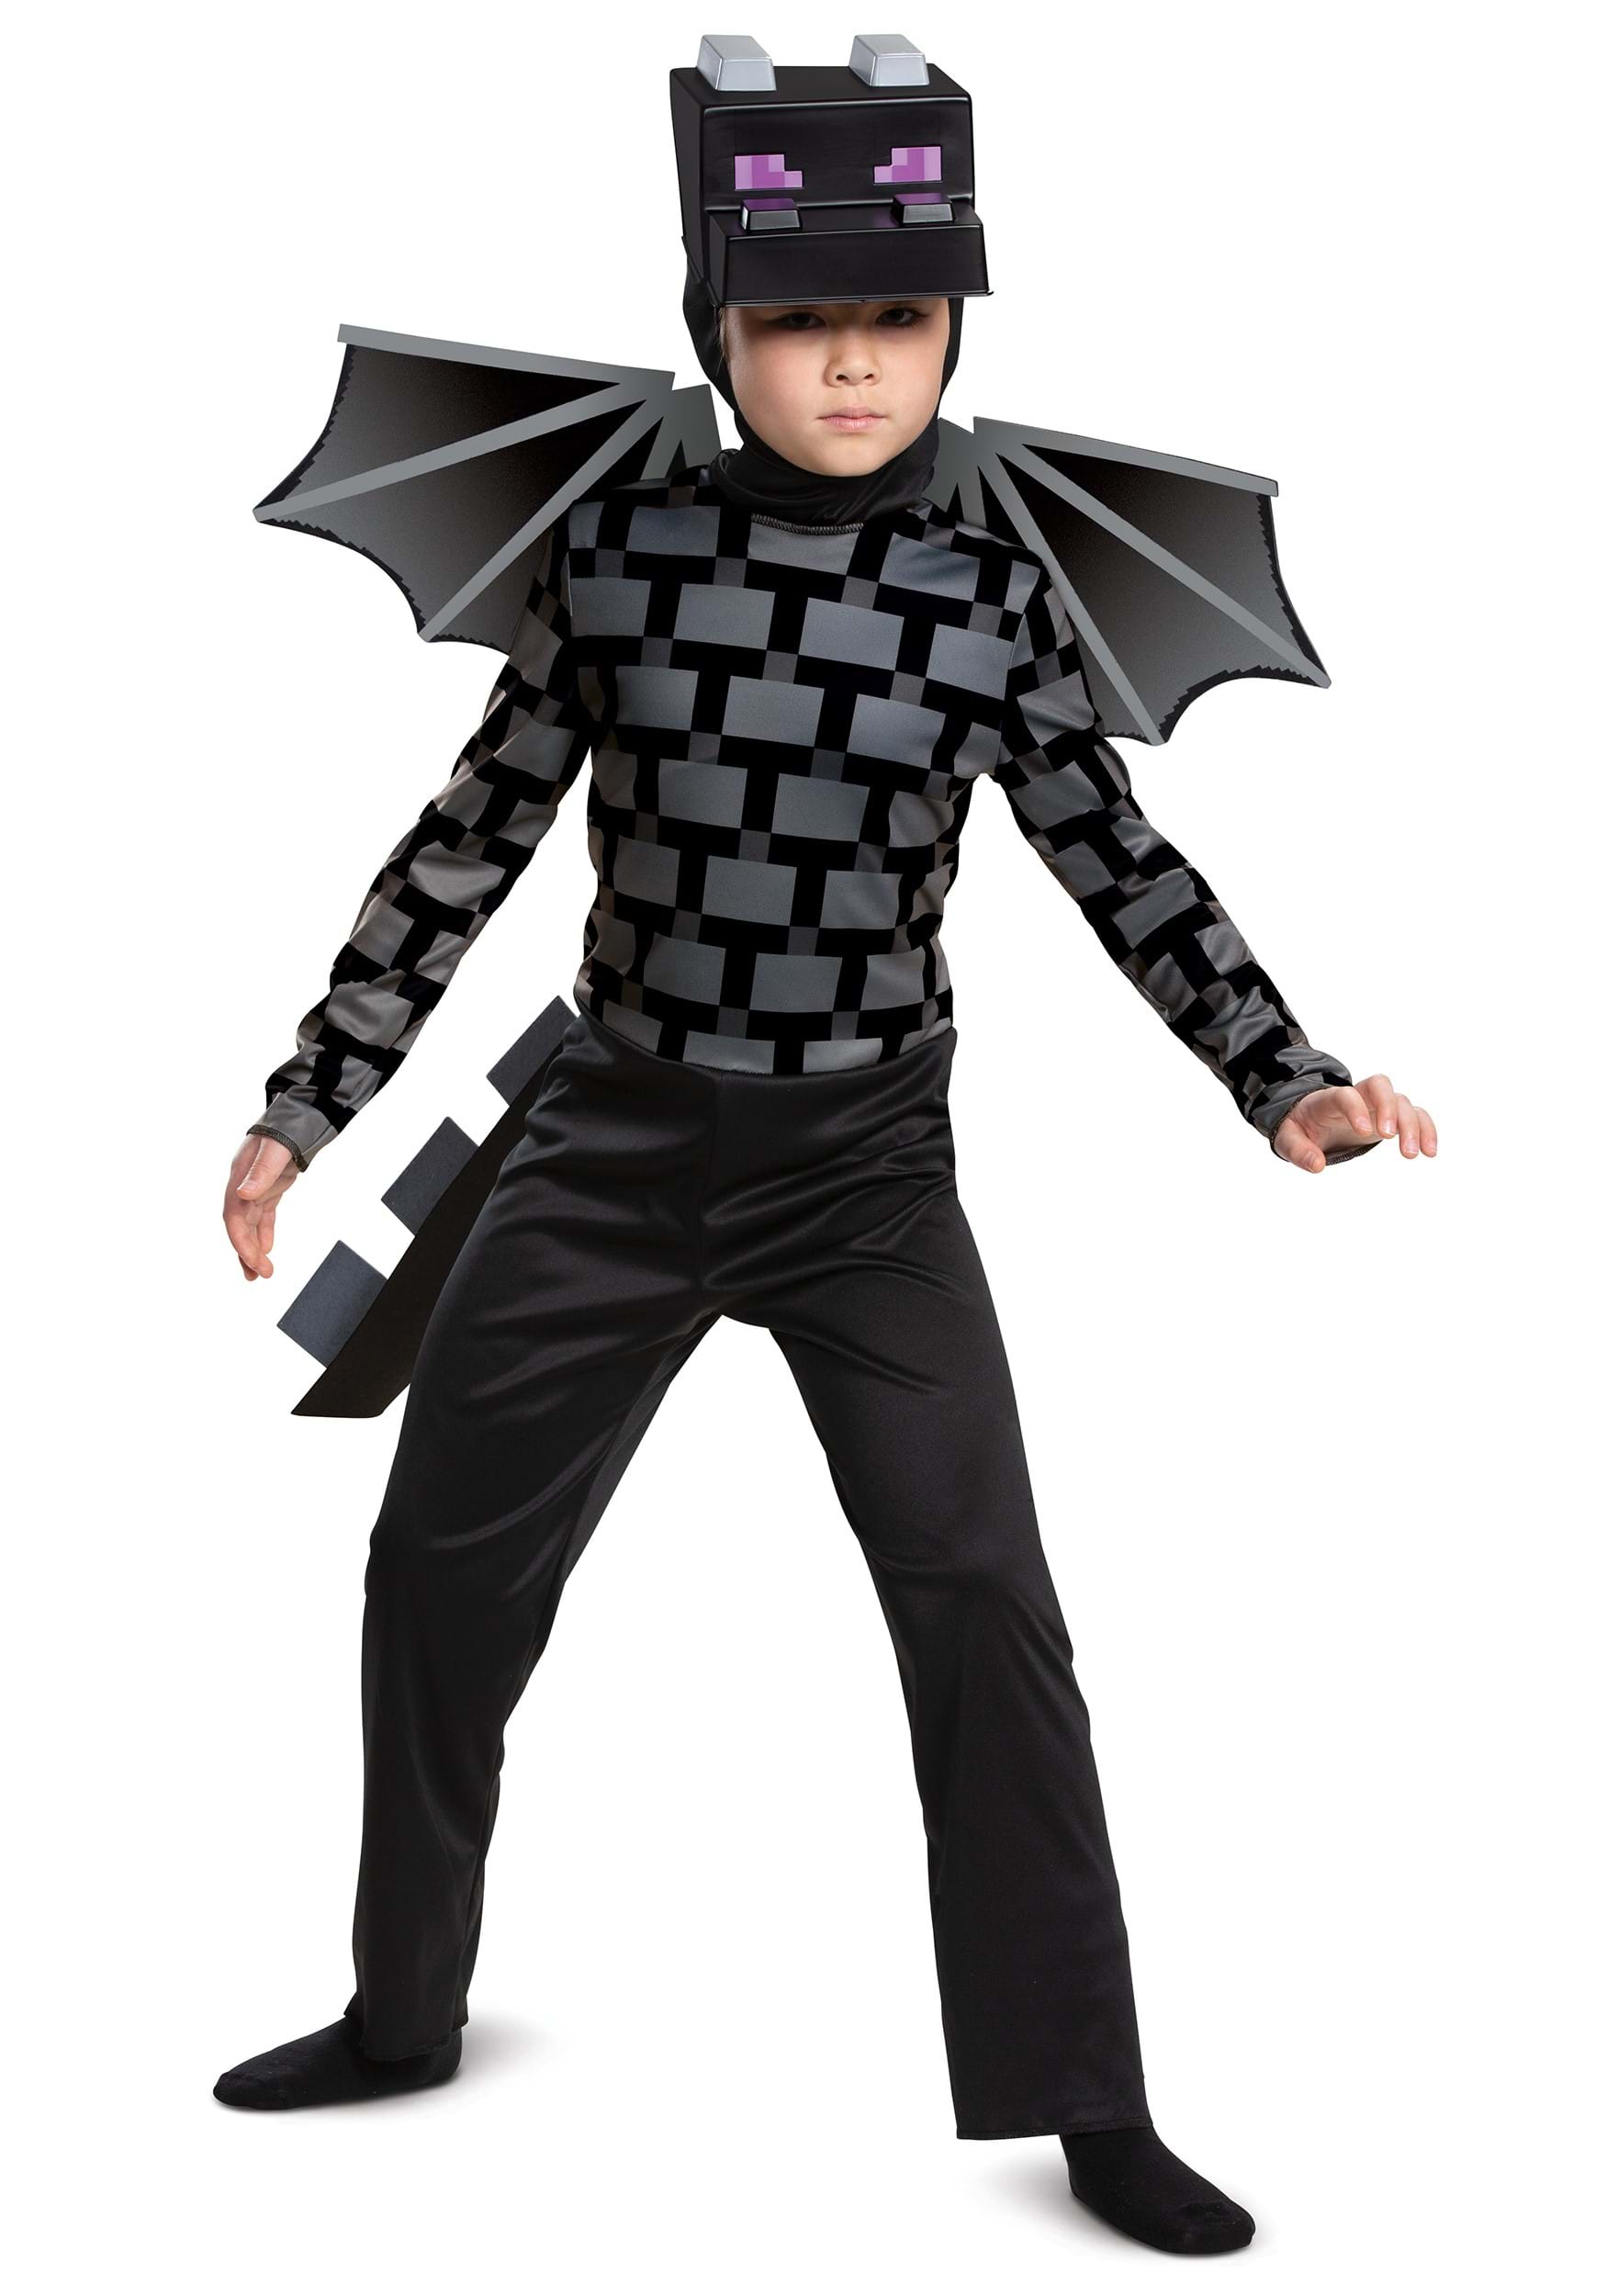 Photos - Fancy Dress Classic Disguise Minecraft  Ender Dragon Child Costume Black/Gray DI105 